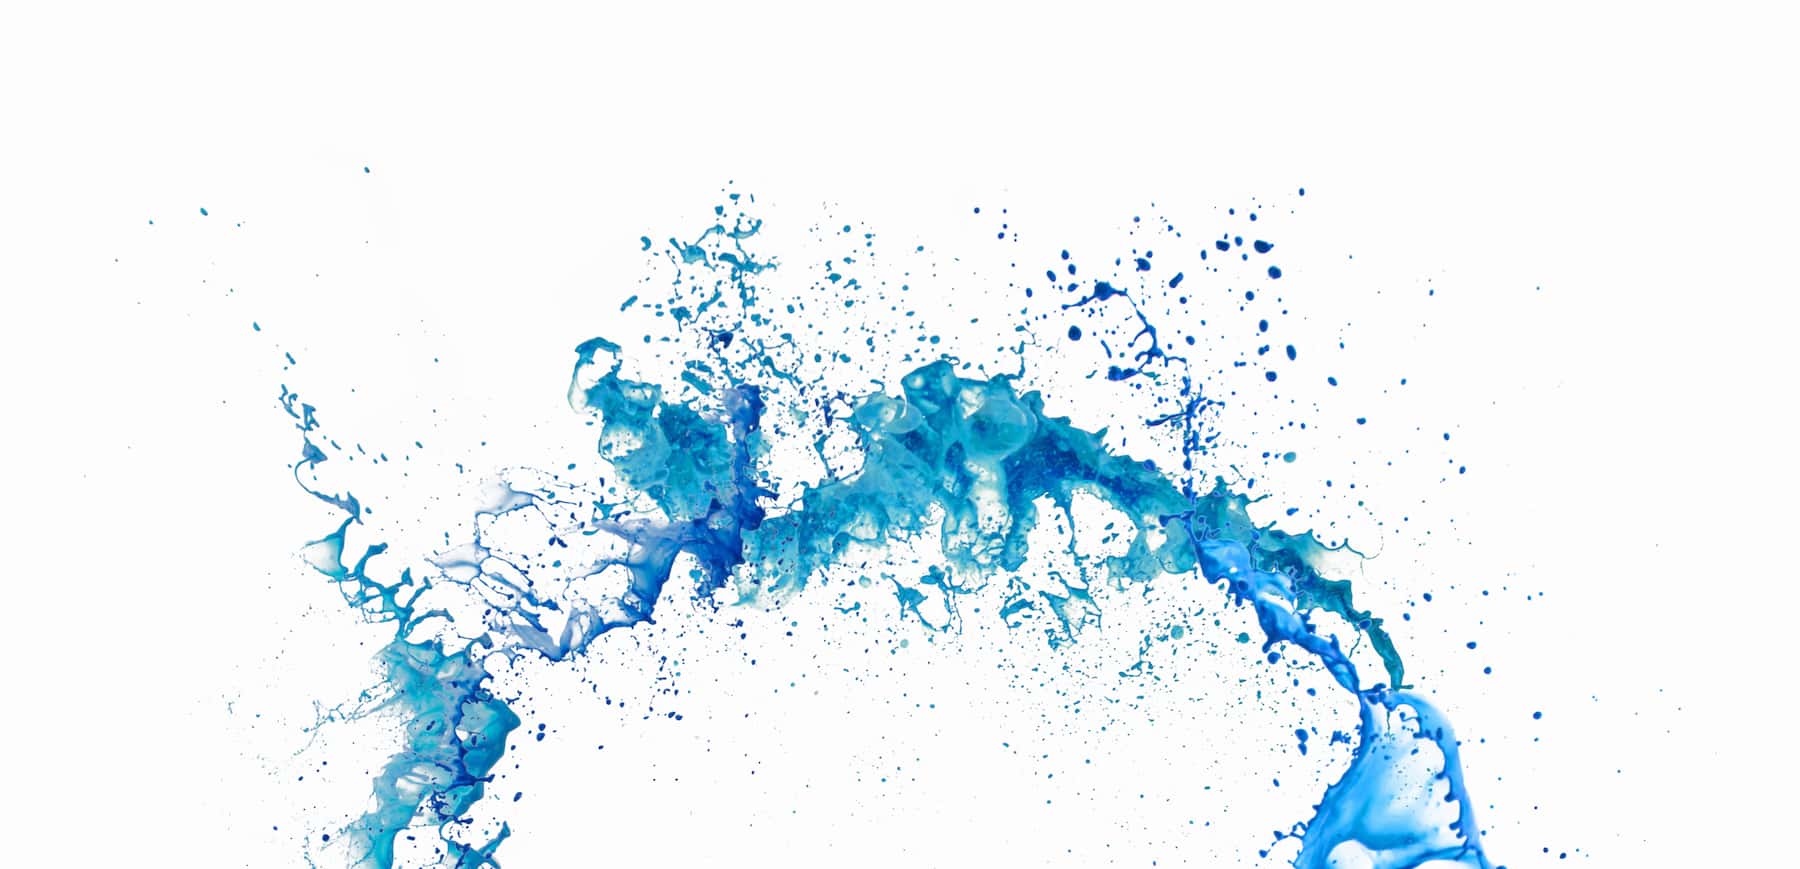 Inkjet ink with blue and green colors splatter